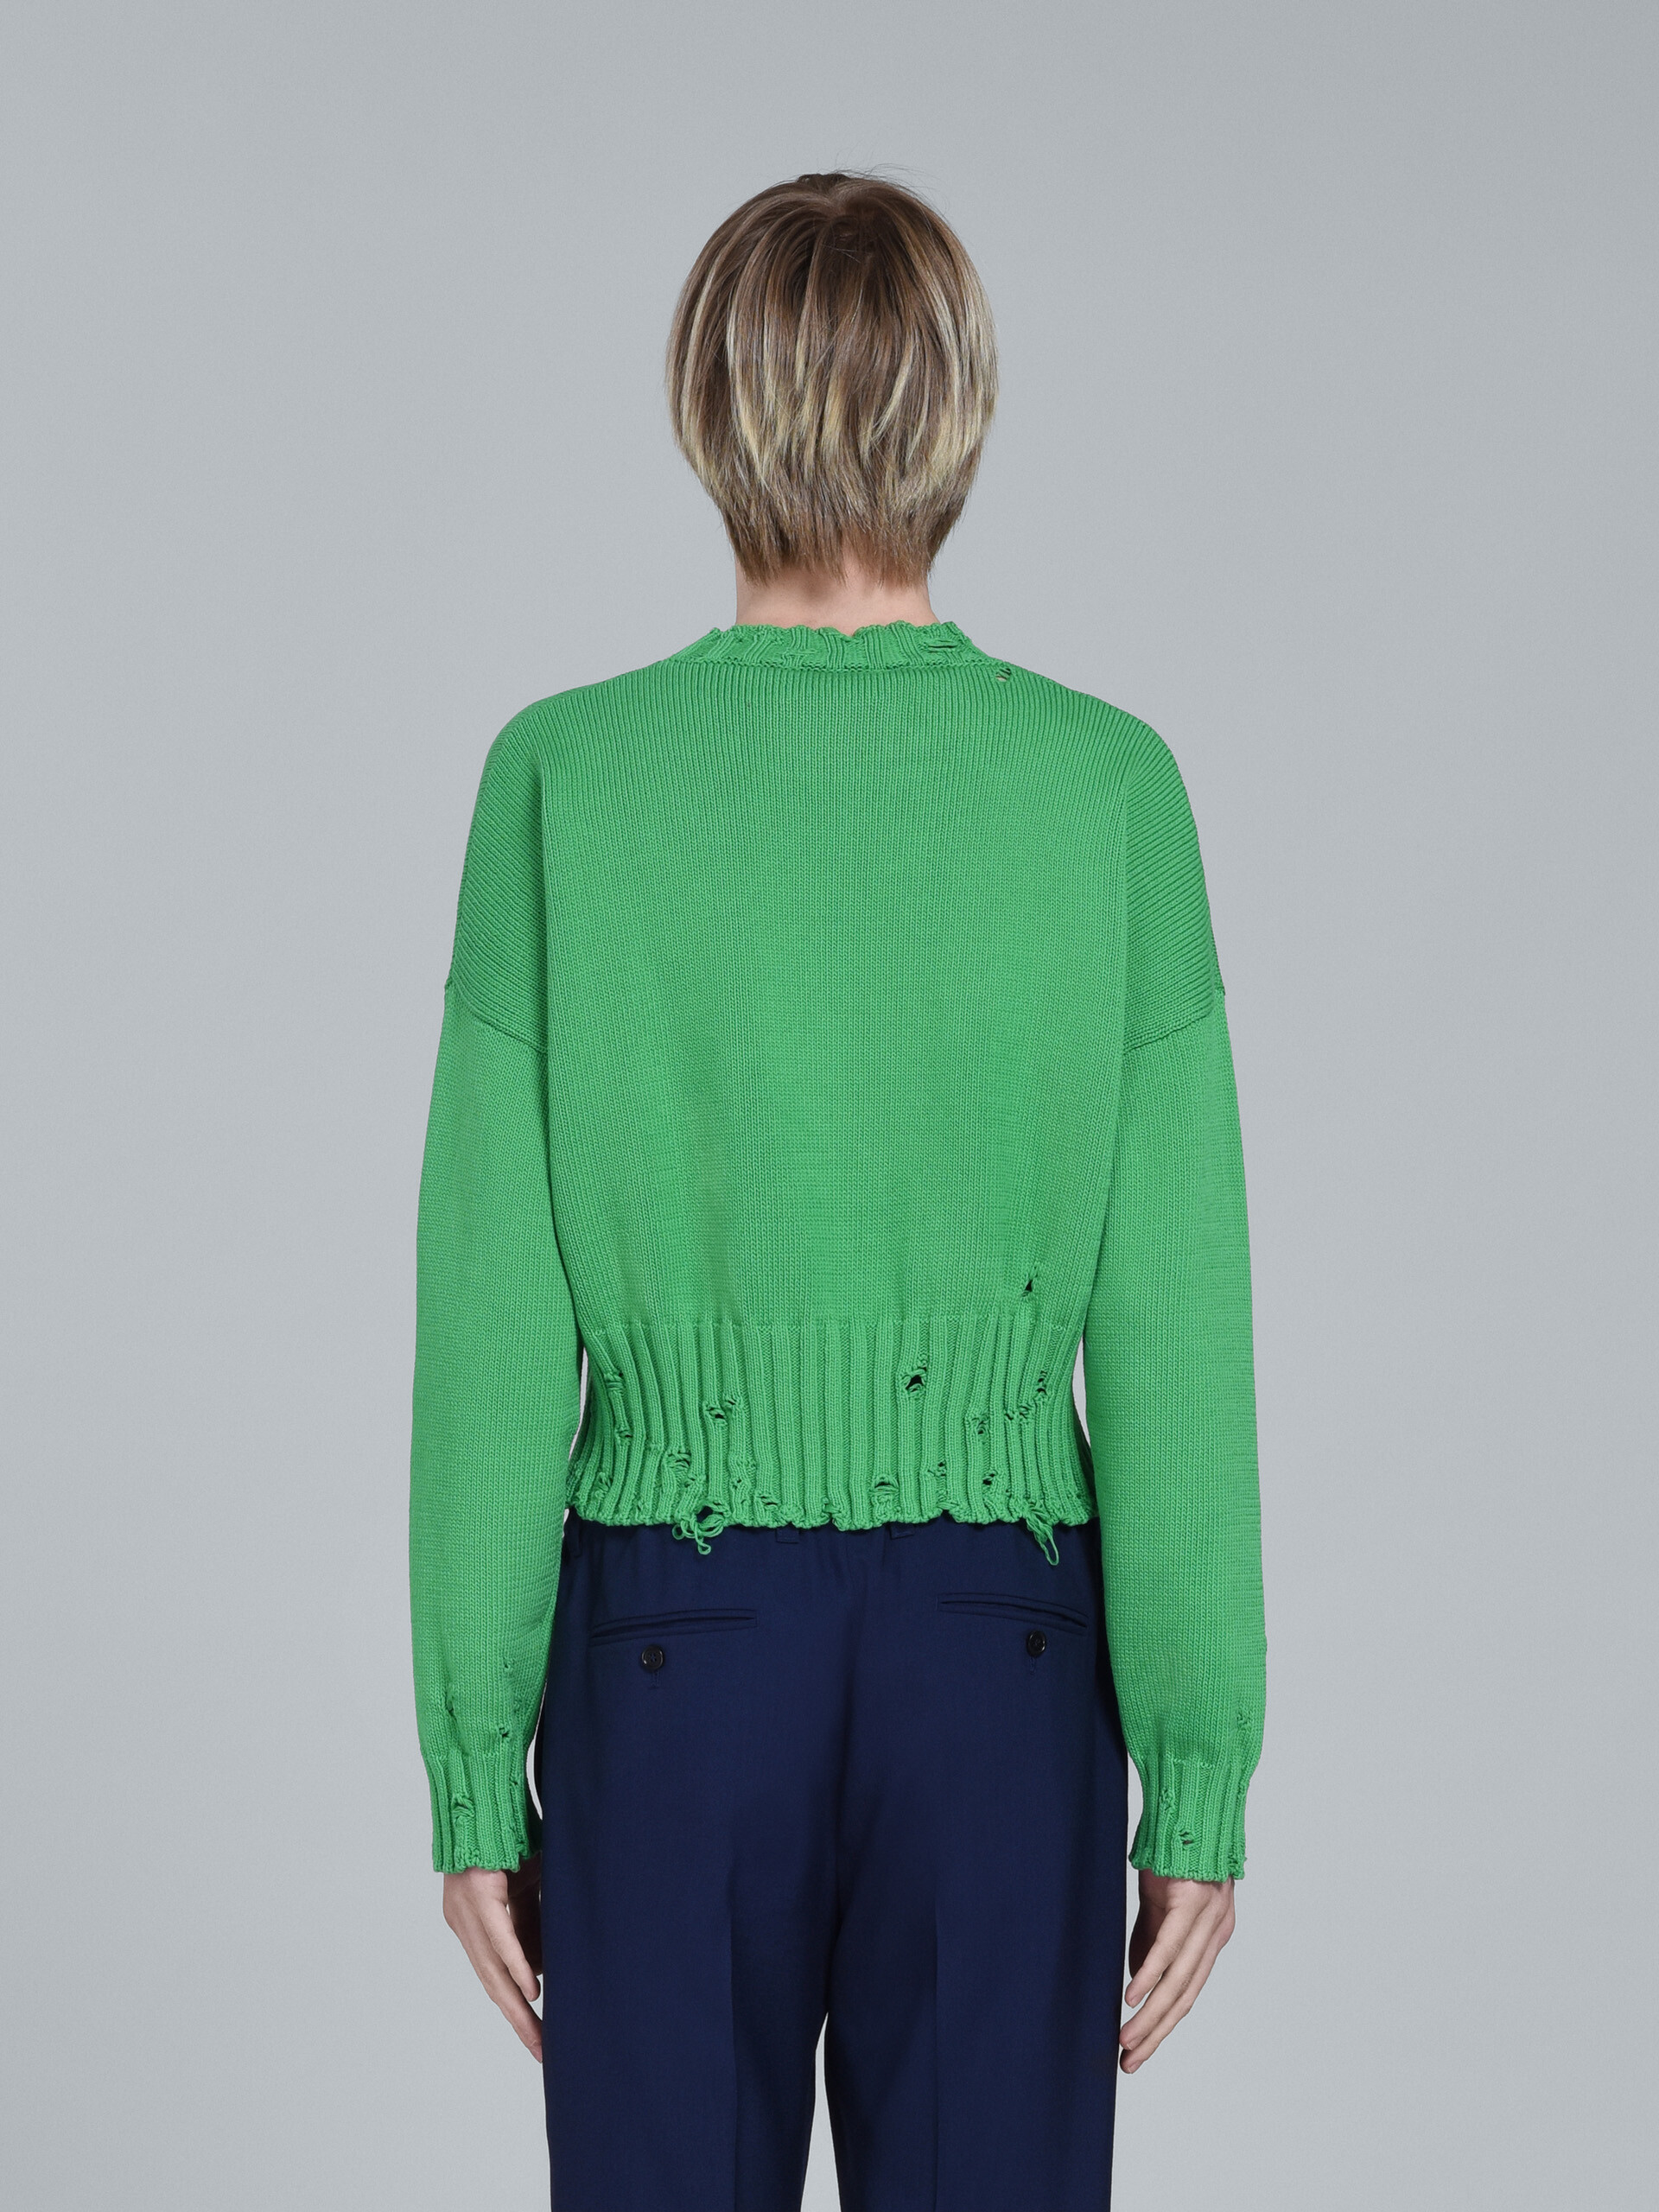 Green cotton crewneck sweater - Pullovers - Image 3